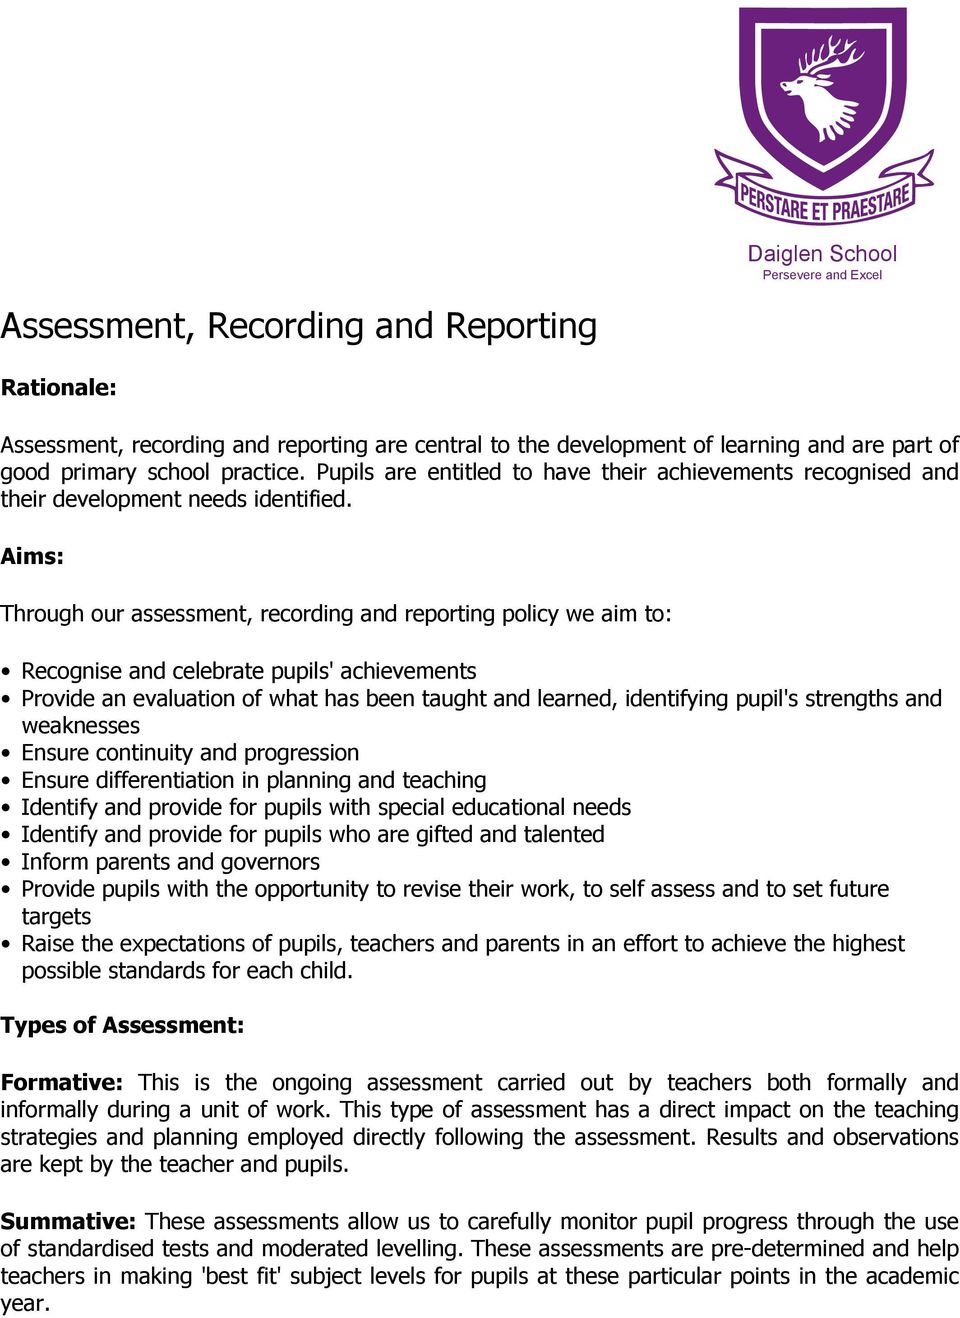 Aims: Through our assessment, recording and reporting policy we aim to: Recognise and celebrate pupils' achievements Provide an evaluation of what has been taught and learned, identifying pupil's